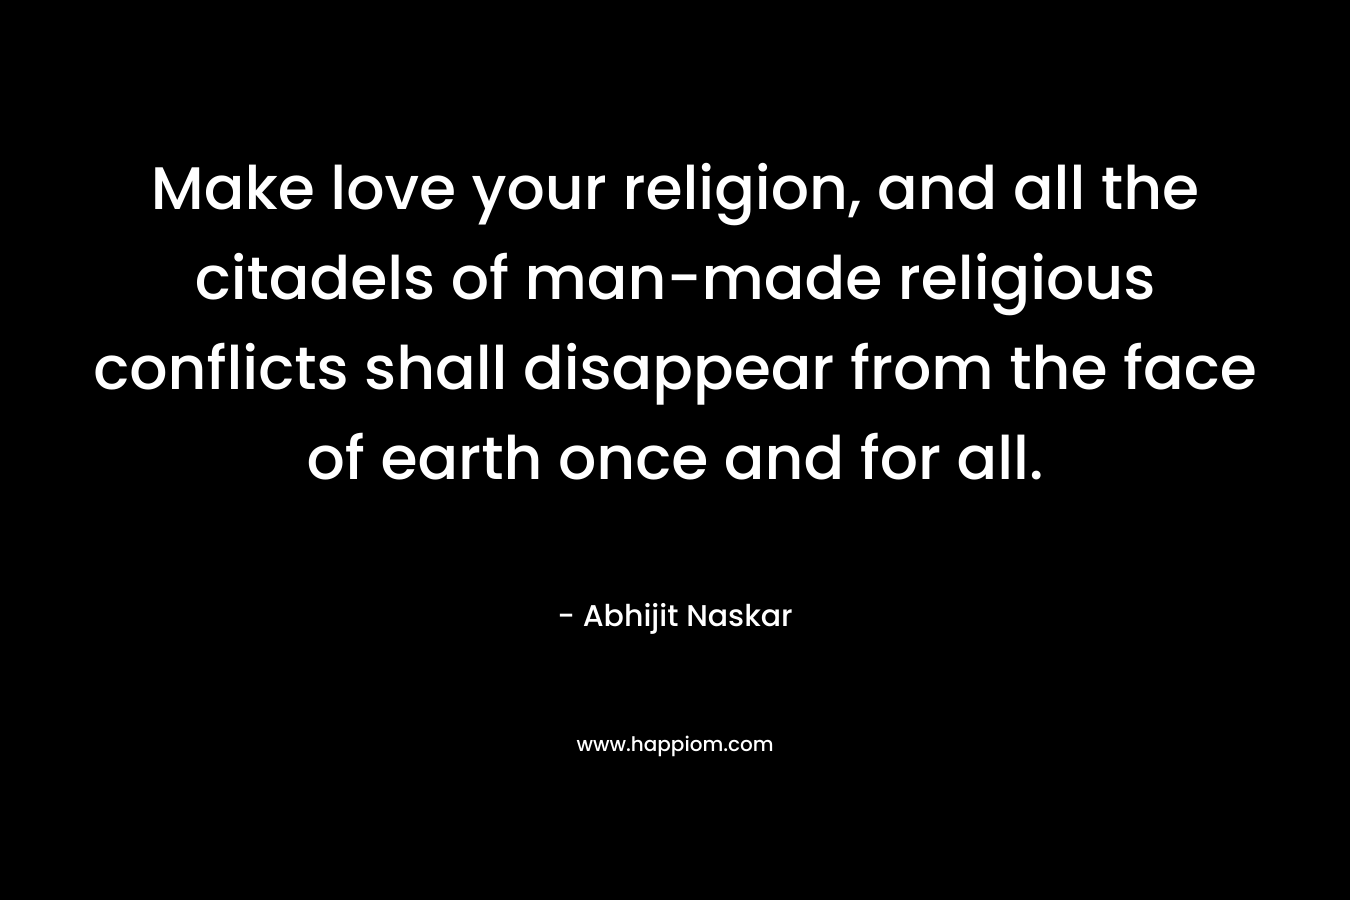 Make love your religion, and all the citadels of man-made religious conflicts shall disappear from the face of earth once and for all.